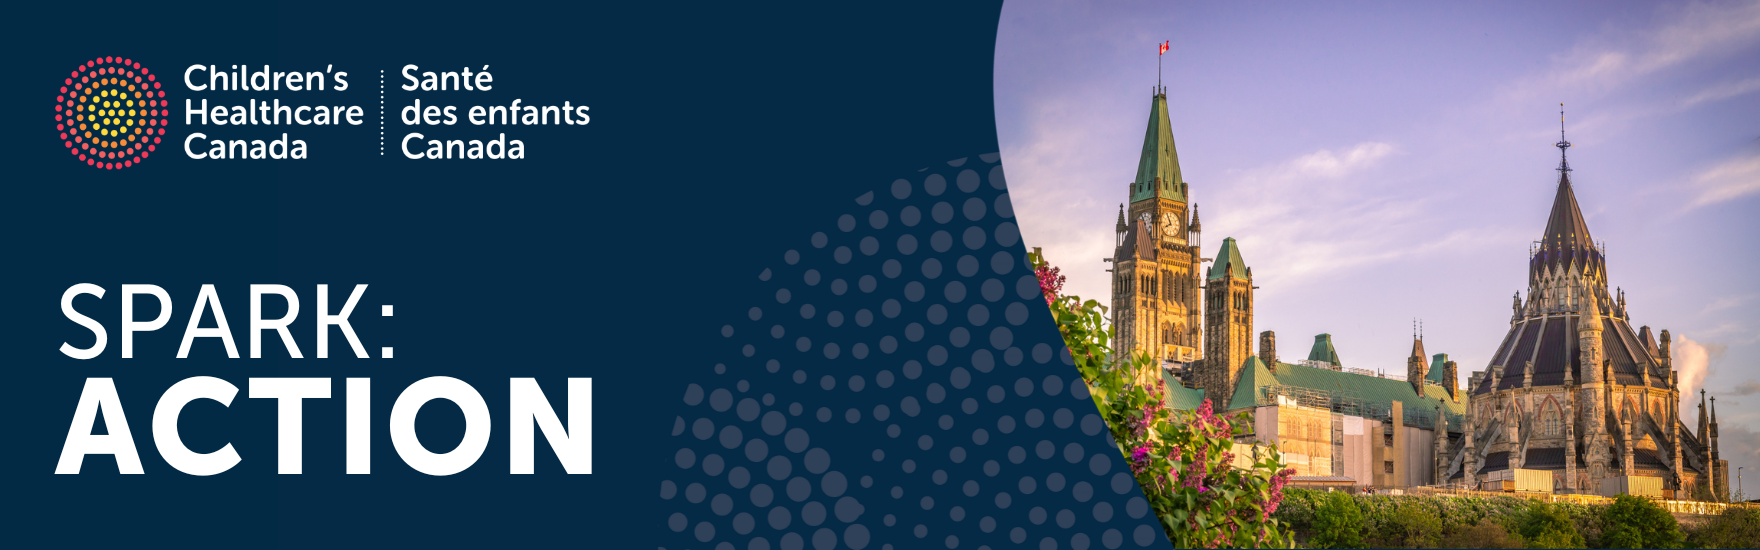 A website banner with the Children's Healthcare Canada logo and text that reads SPARK: Action. The banner includes an image of the Parliament buildings in Ottawa, Ontario.